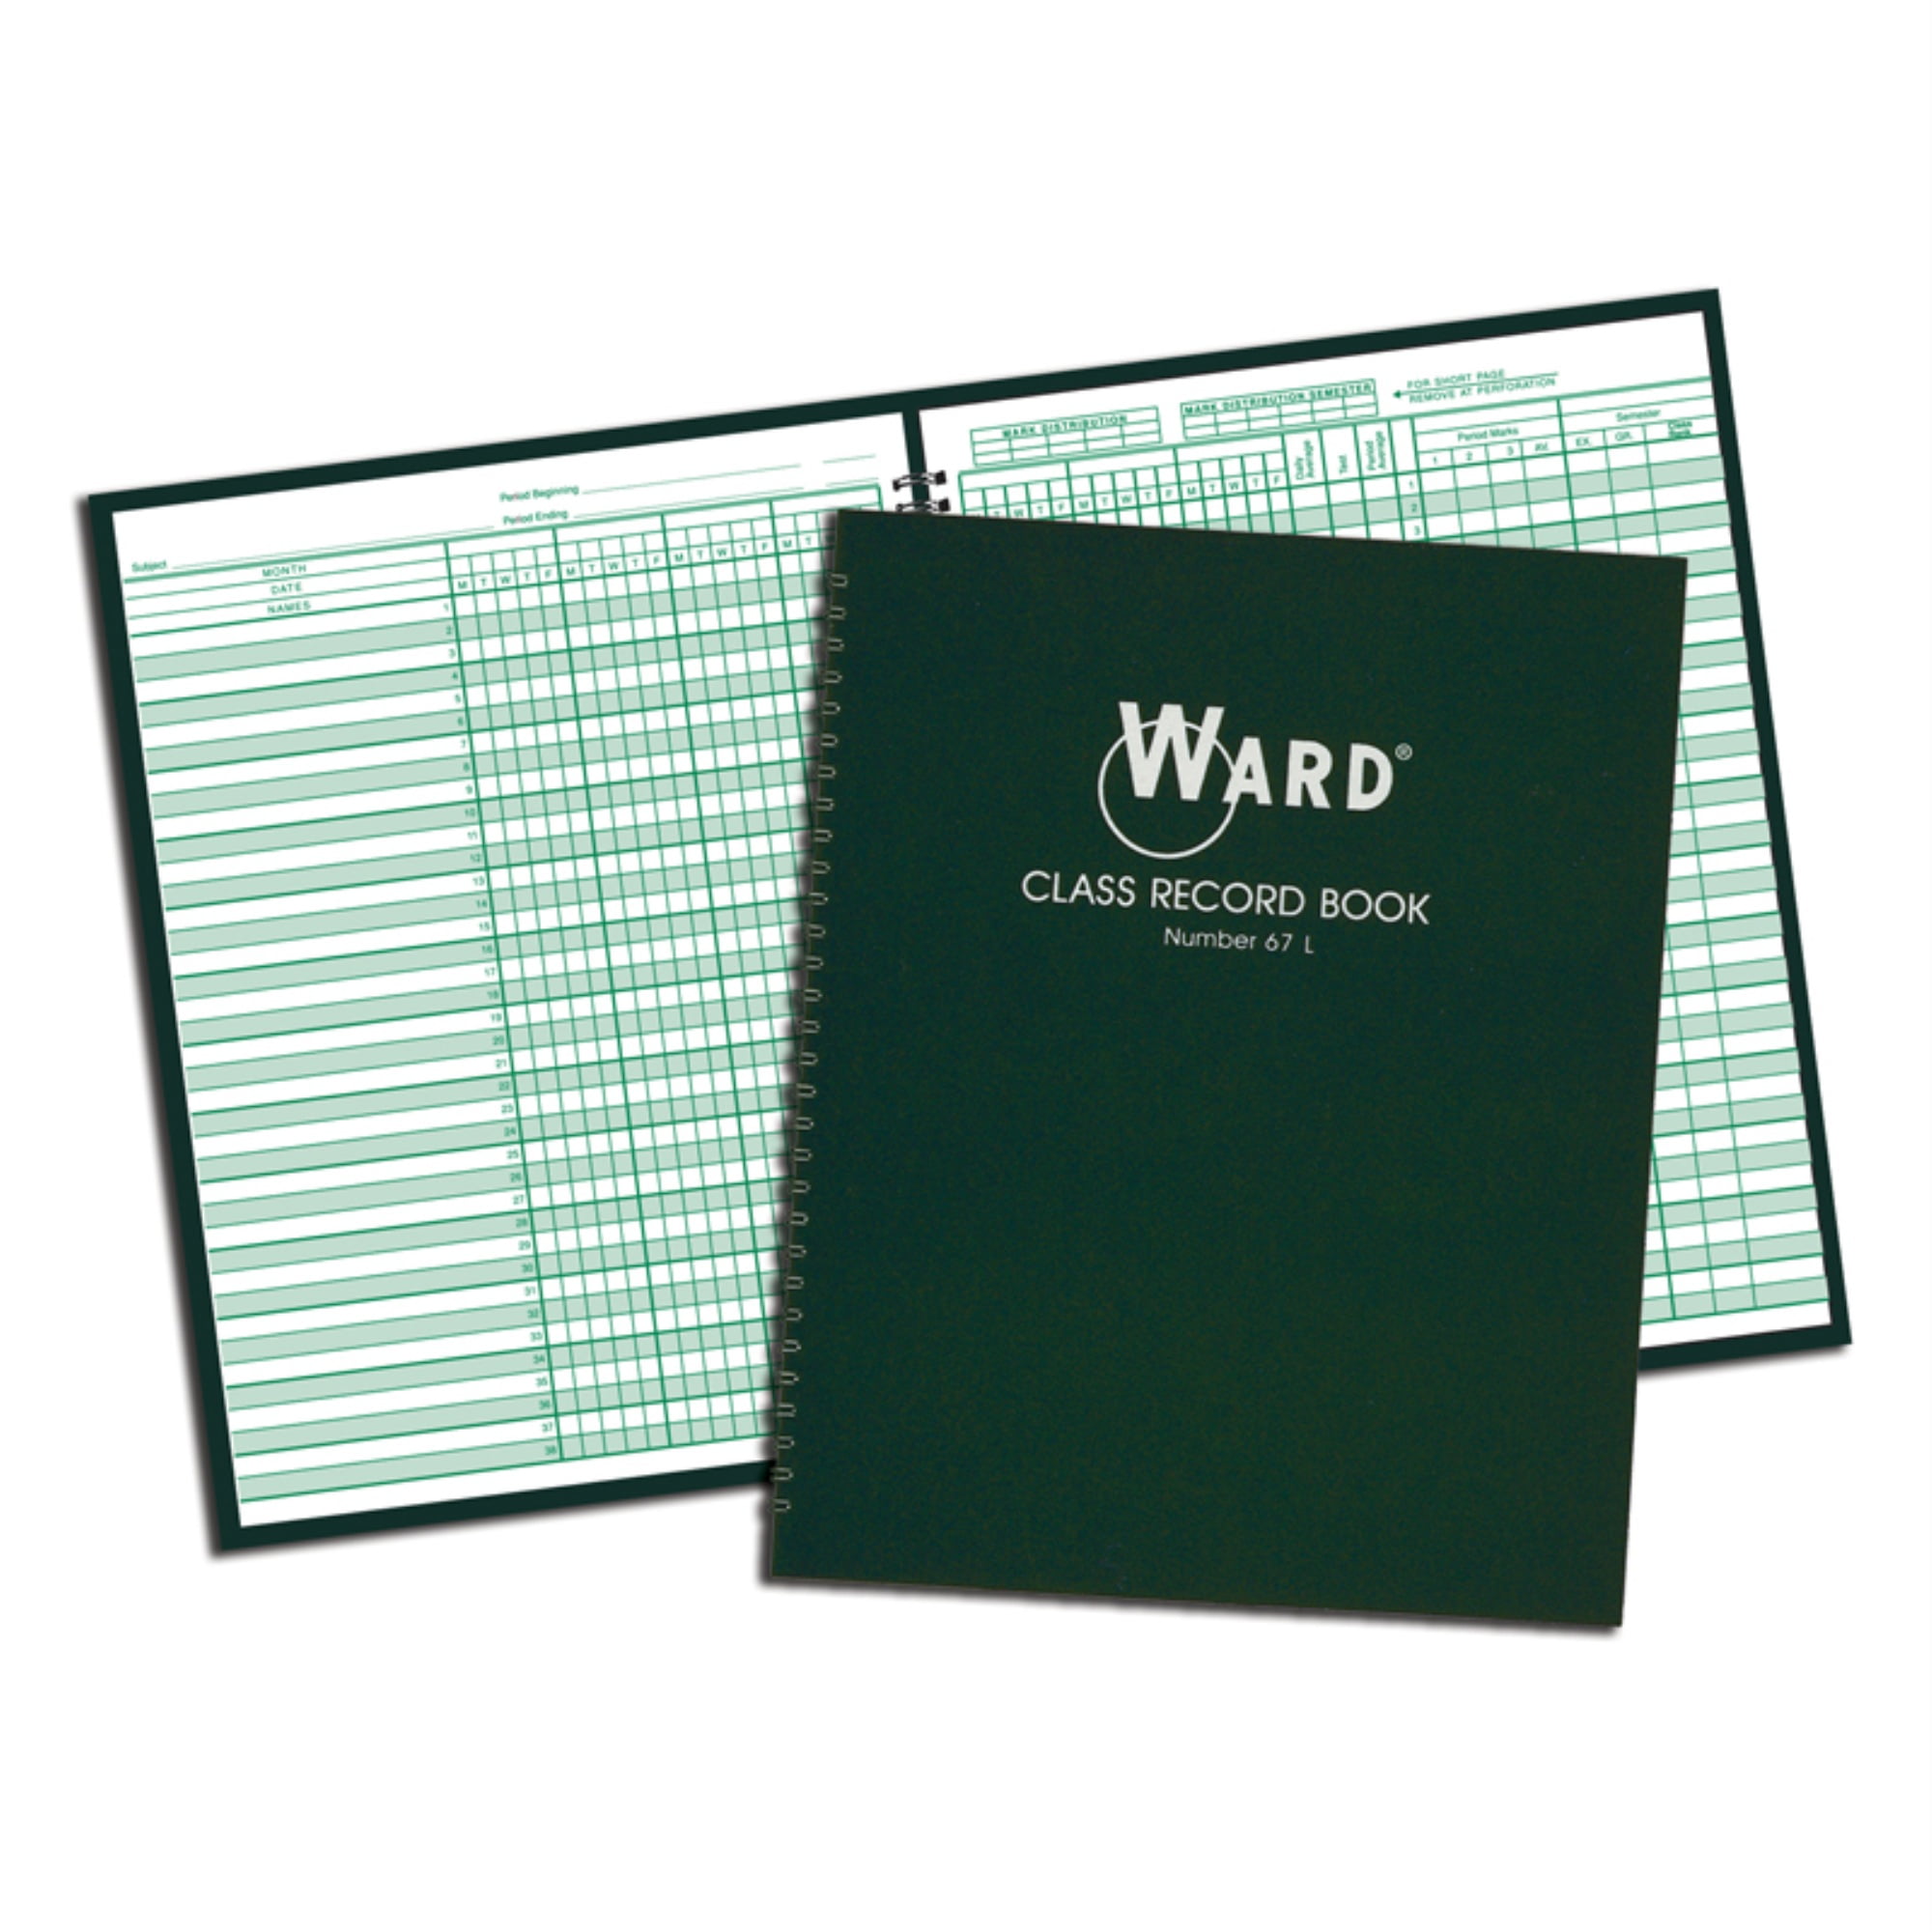 Ward 910l Class Record Book 38 Students 9-10 Week 11 X 8 1/2 Green for sale online 